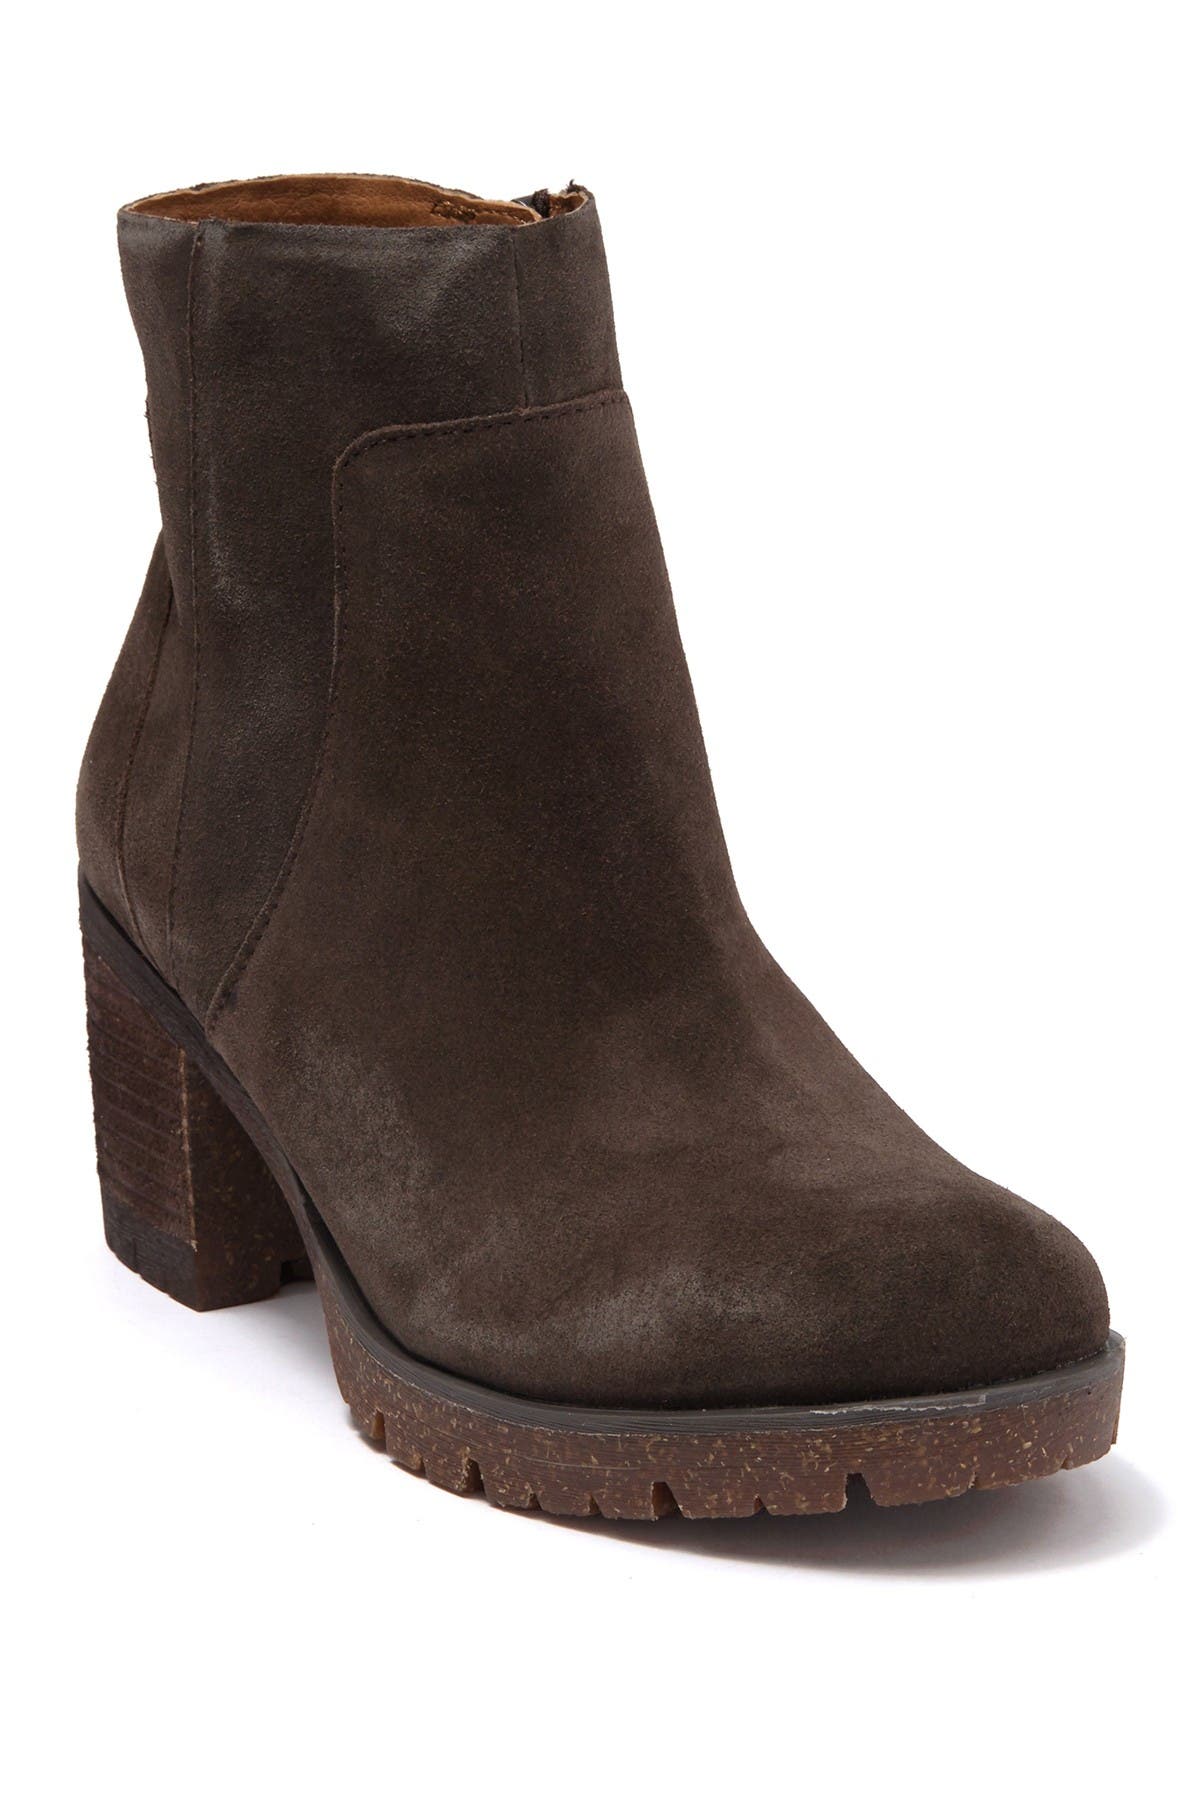 nordstrom ankle boots